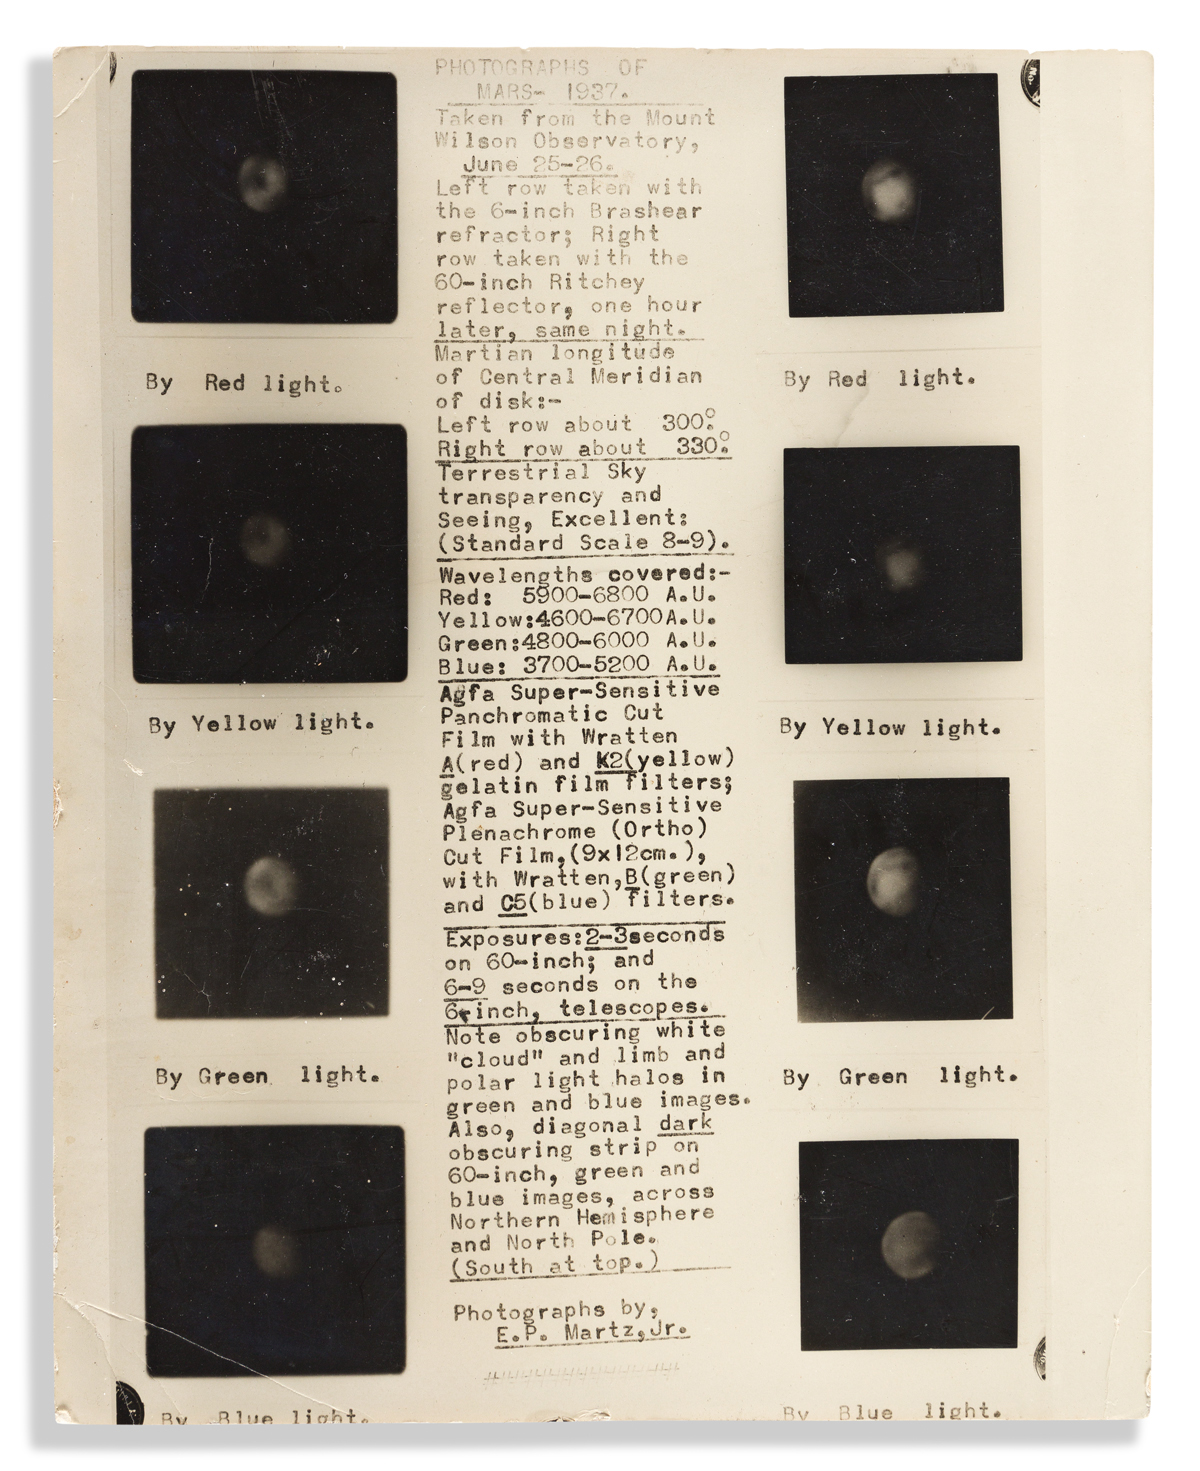 (SCIENCE & ENGINEERING.) Edwin Martz. Letter by a young astronomer, accompanied by his early photographs of Mars.